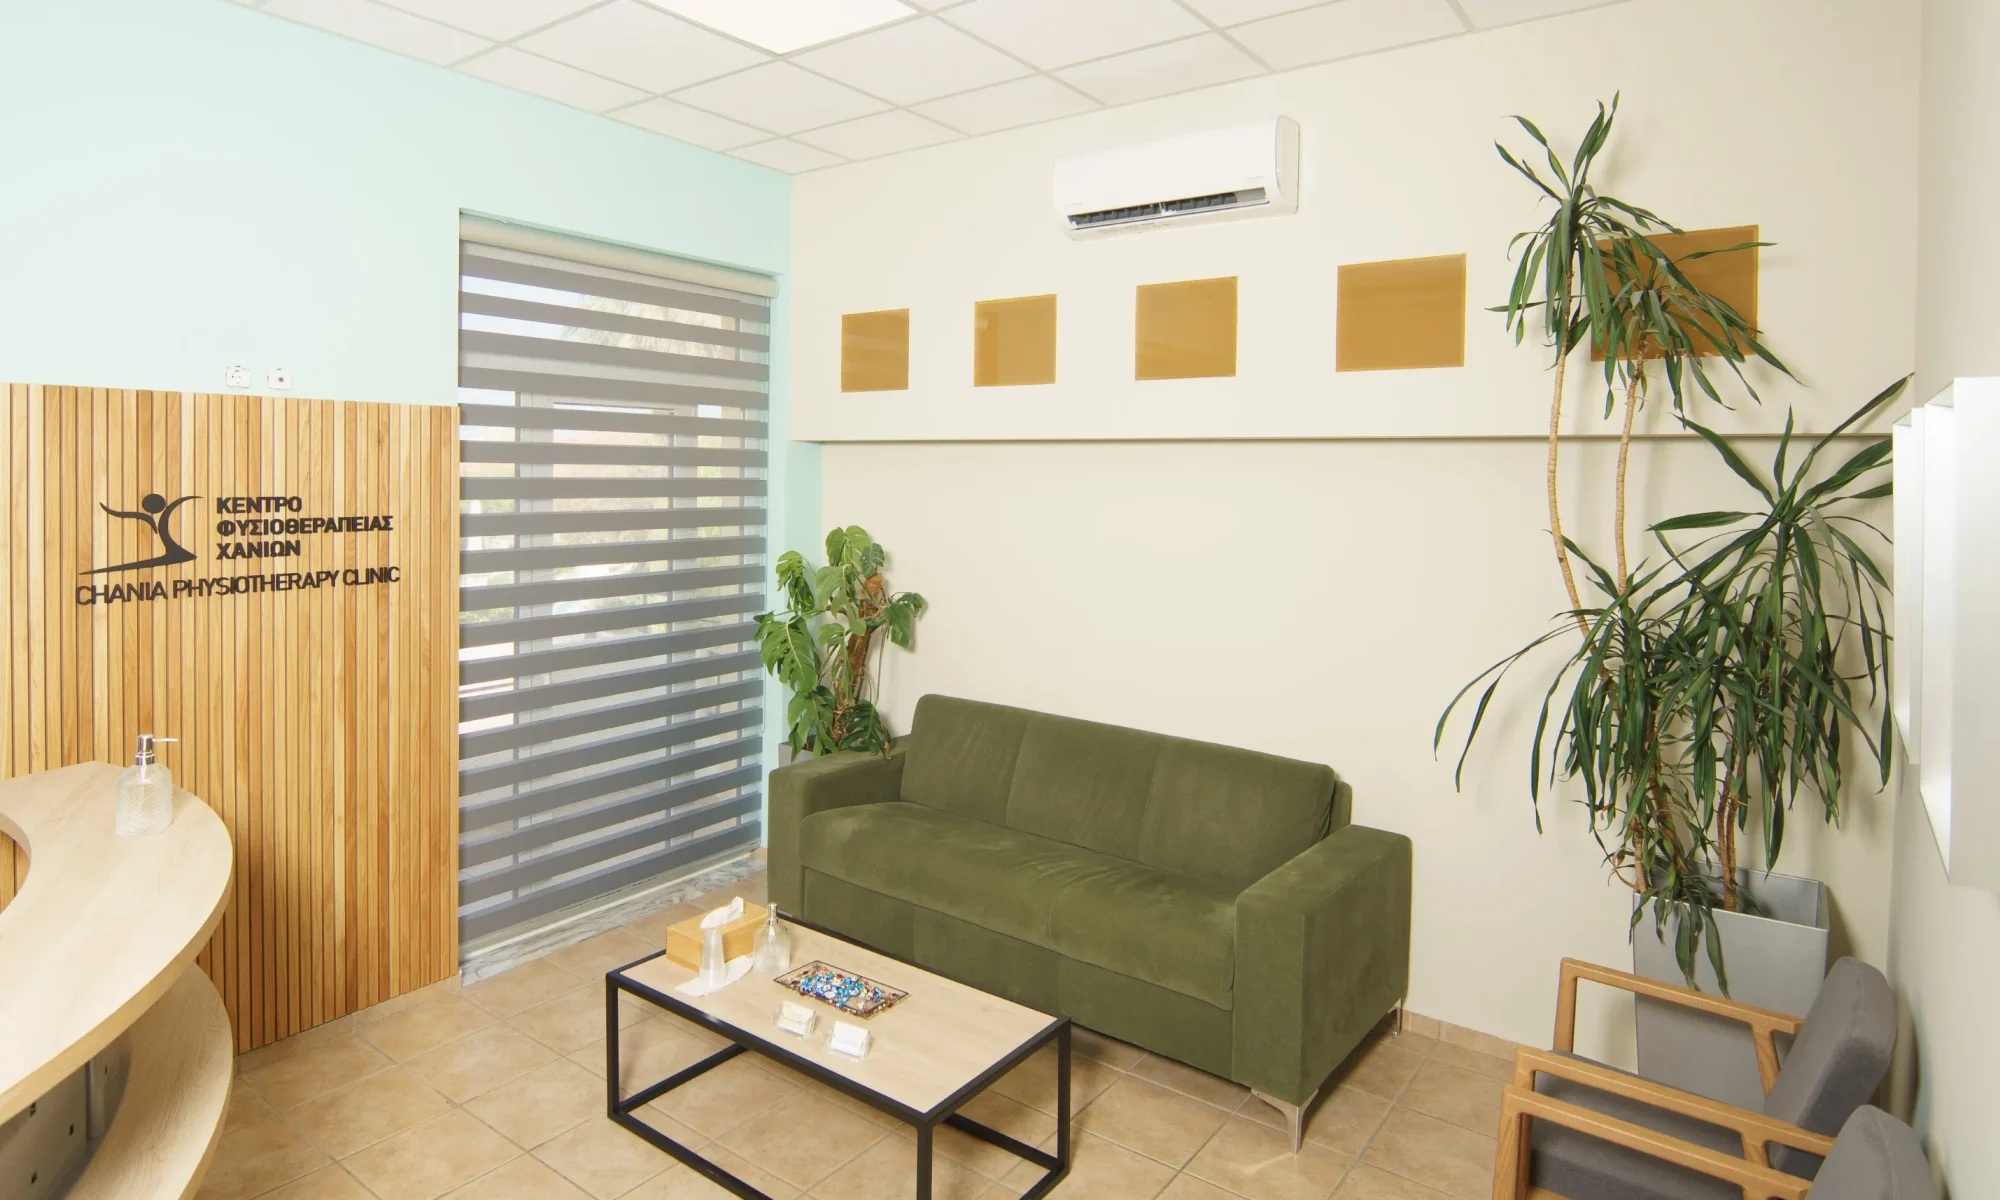 Physiotherapy Facilities - Chania Physiotherapy Clinic